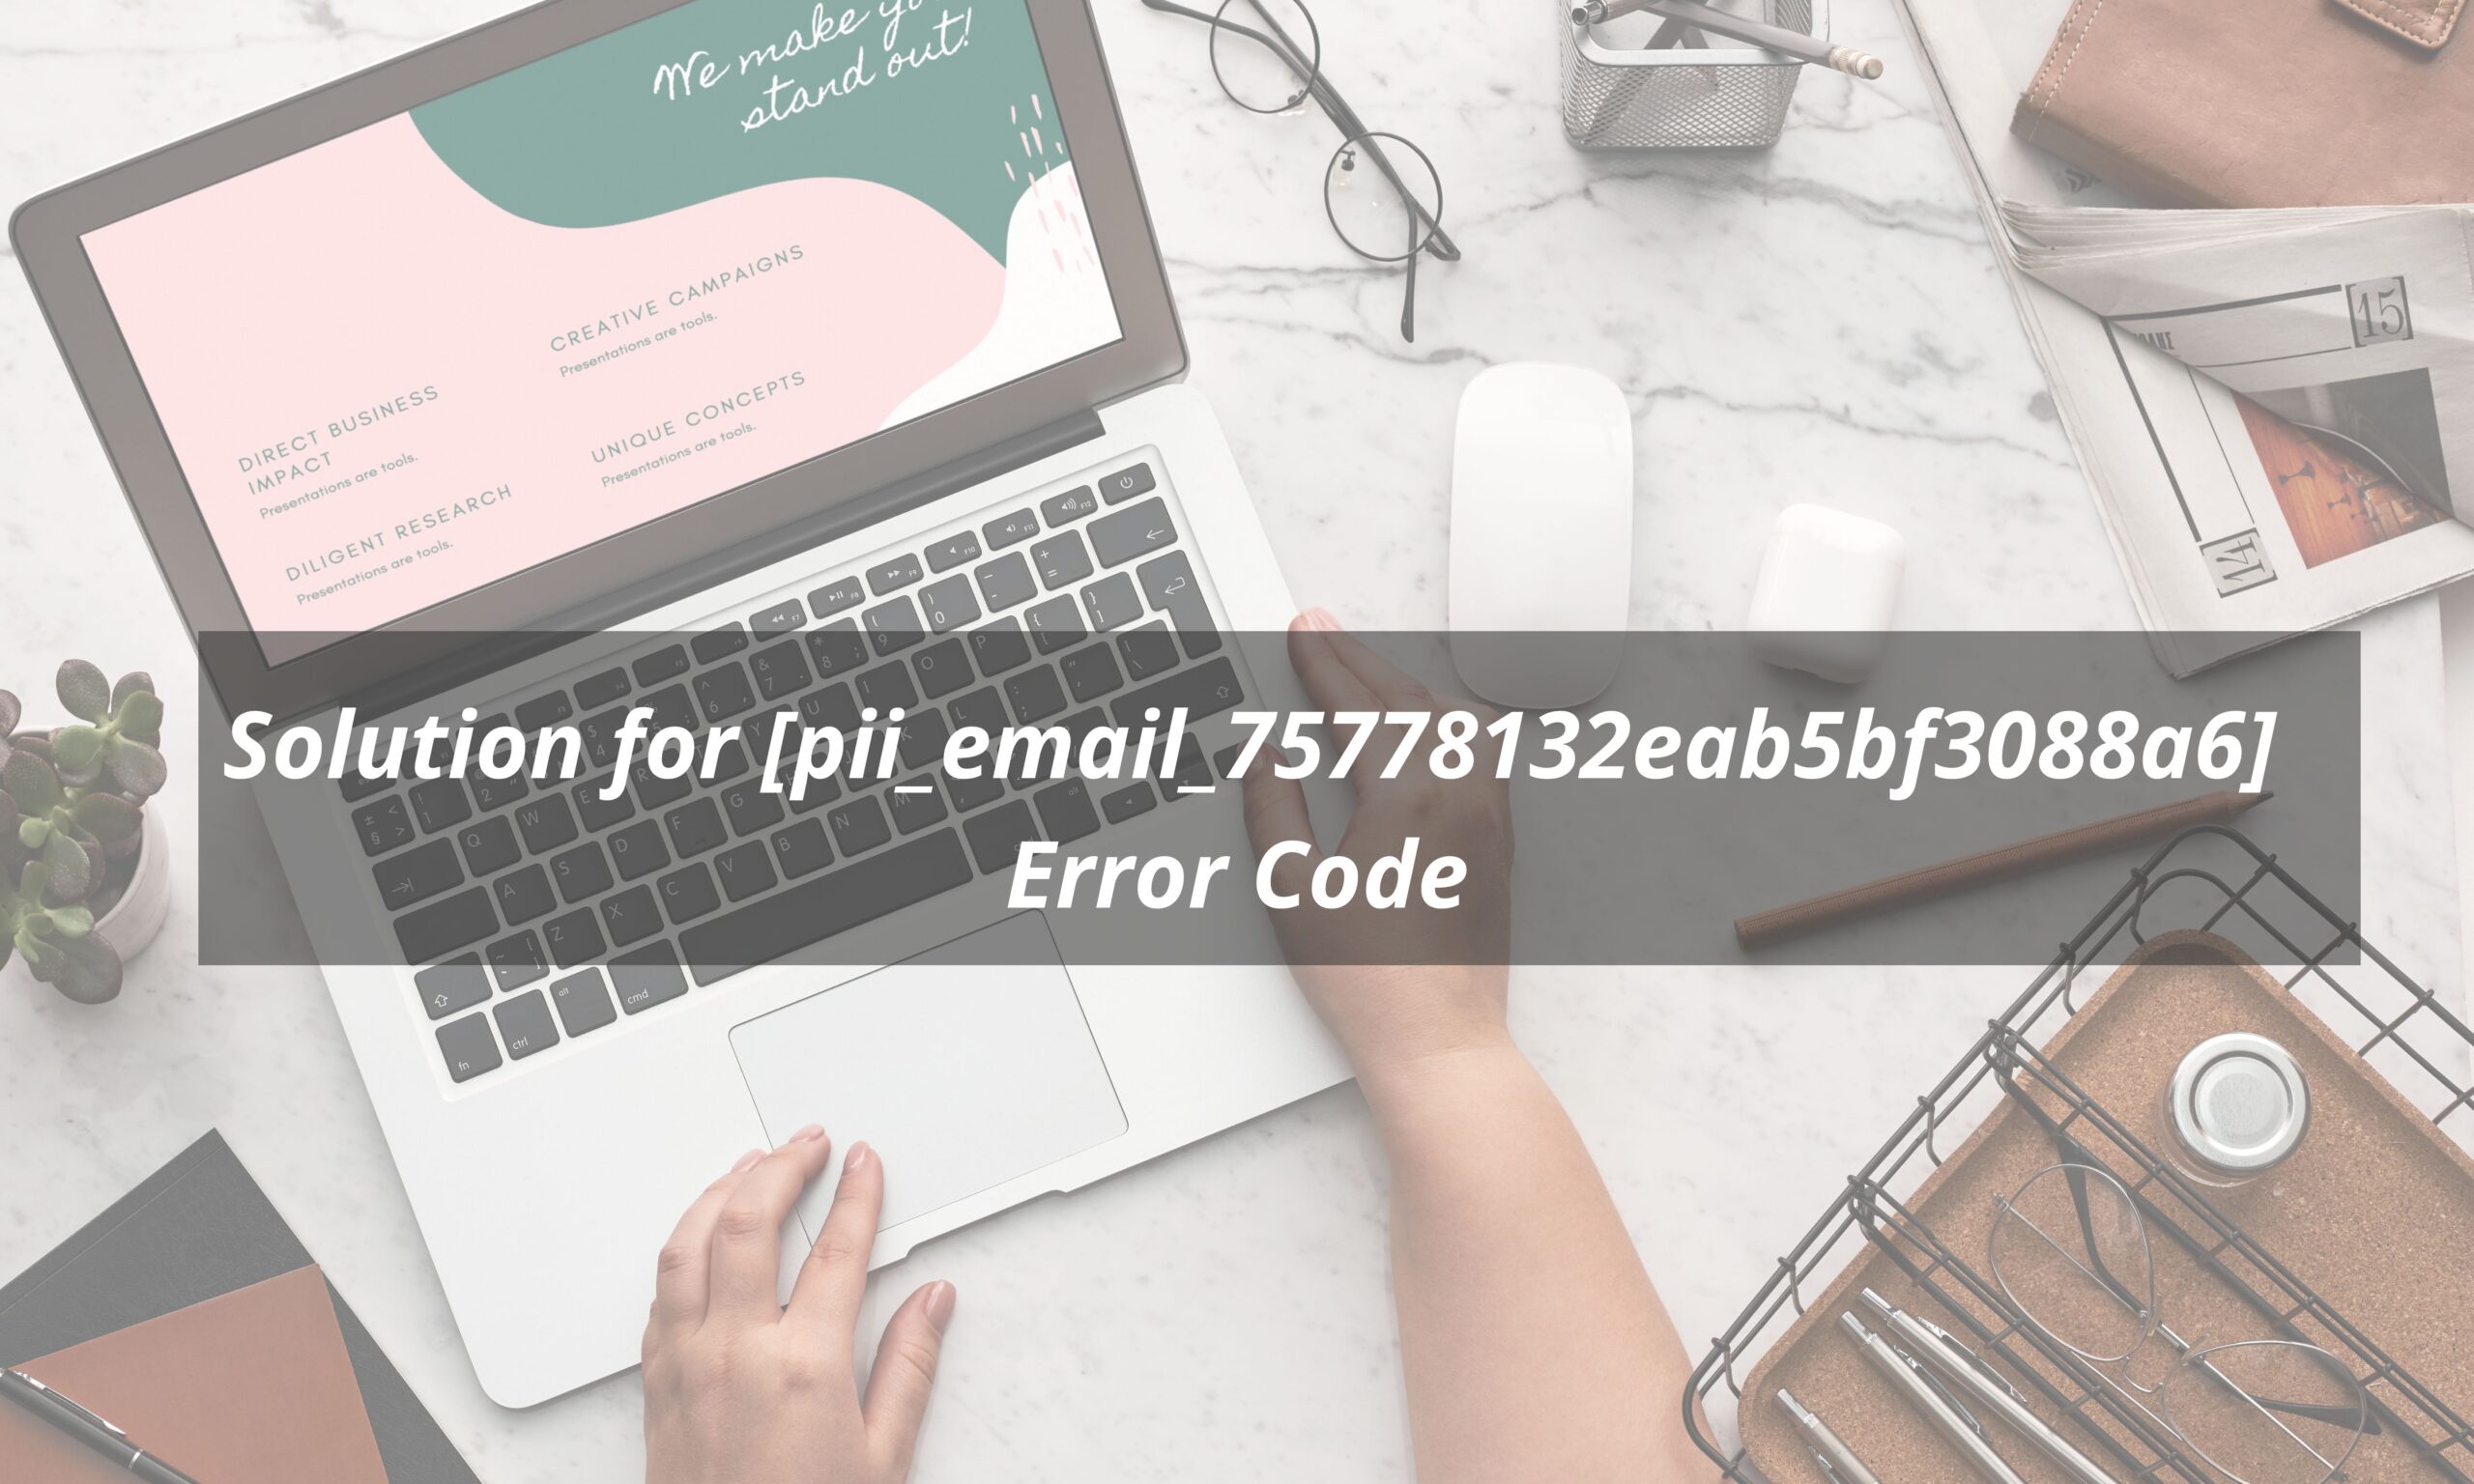 Solution for [pii_email_75778132eab5bf3088a6] Error